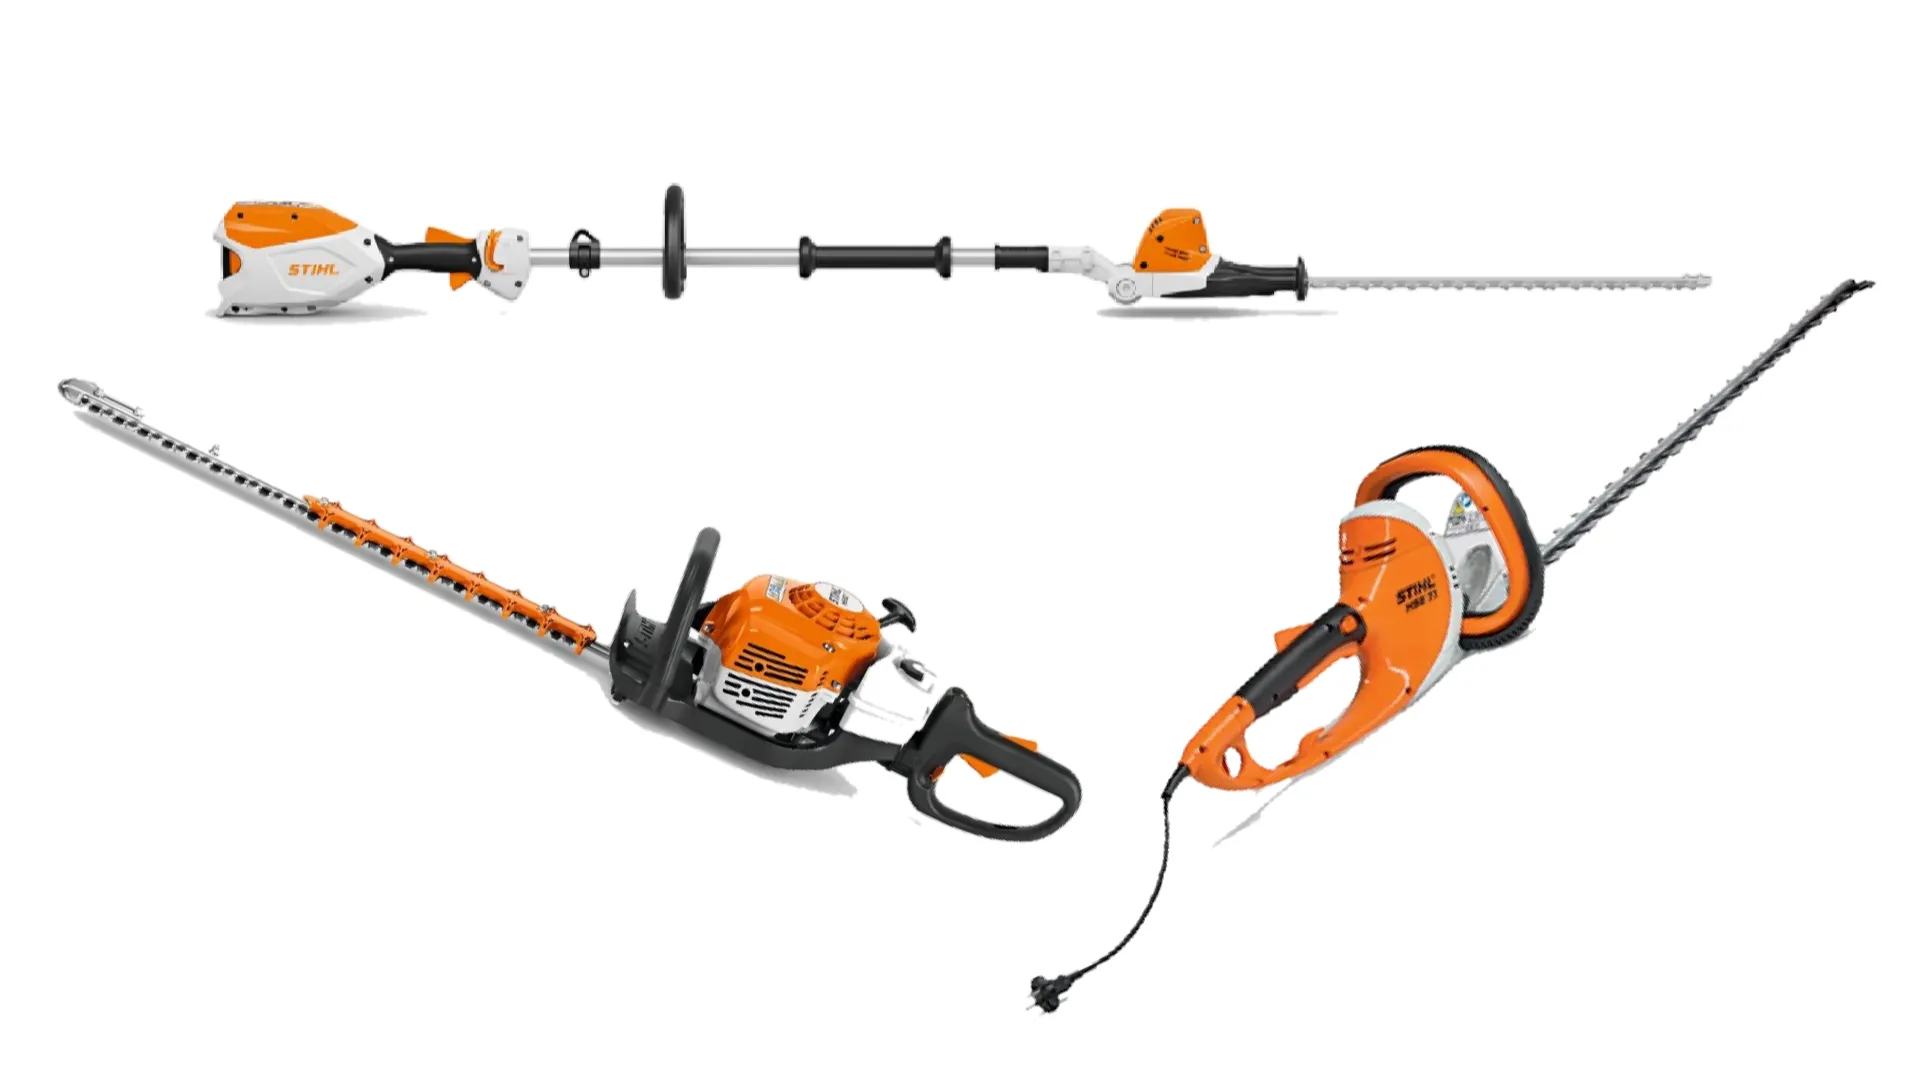 Cream of the Crop: The Best Stihl Hedge Trimmers of the Year